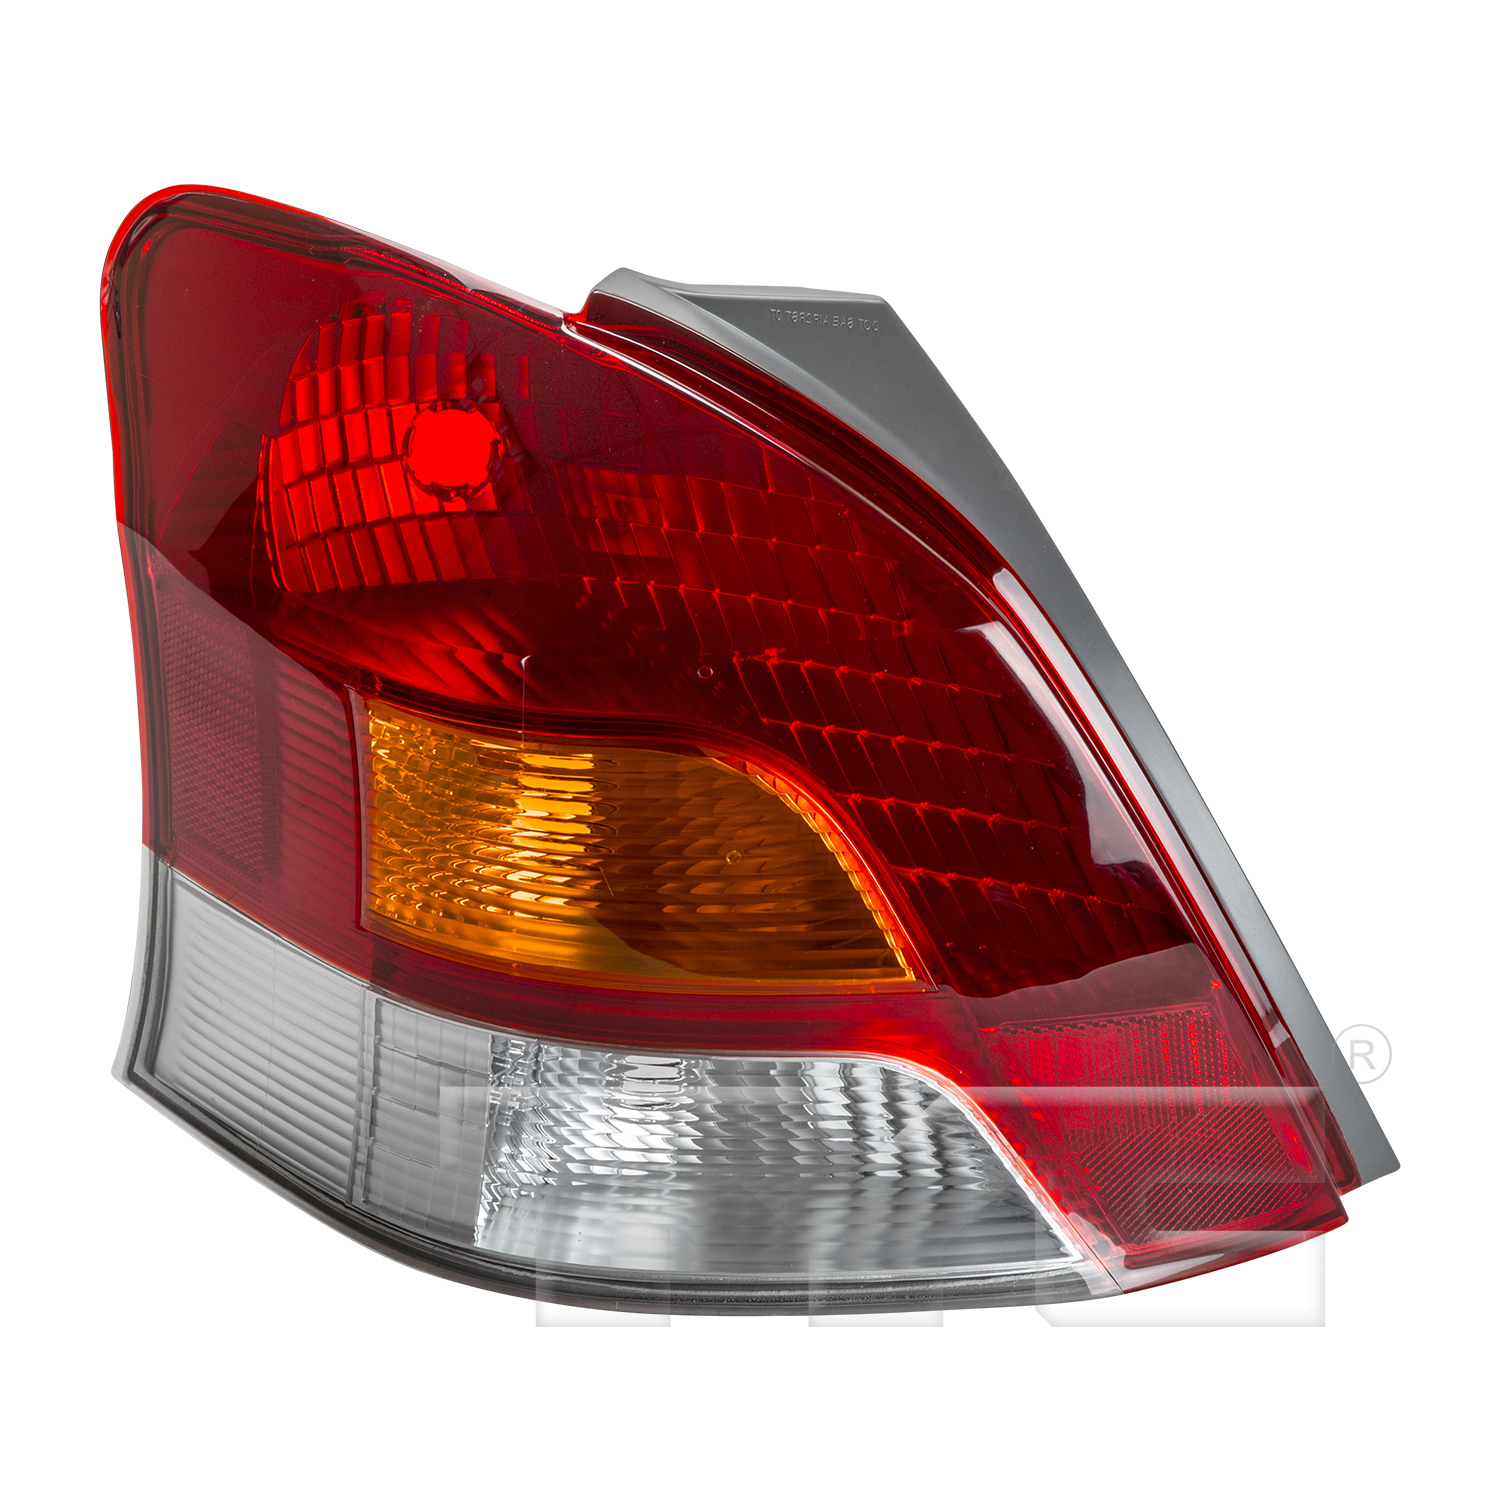 Aftermarket TAILLIGHTS for TOYOTA - YARIS, YARIS,09-11,LT Taillamp lens/housing